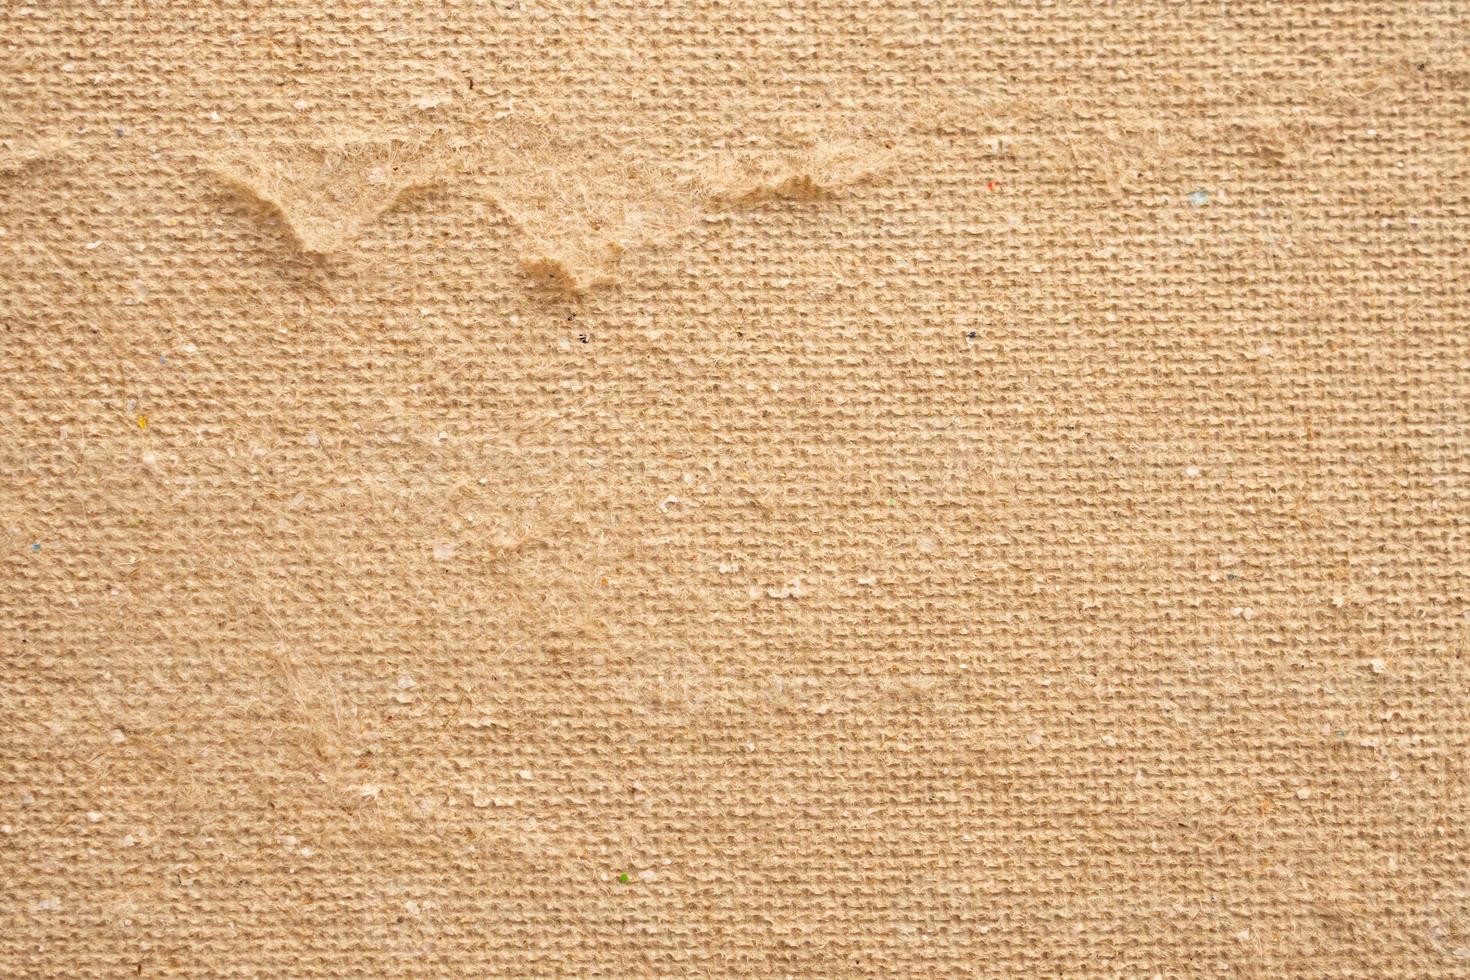 Old Brown Recycle Paper Texture Background photo